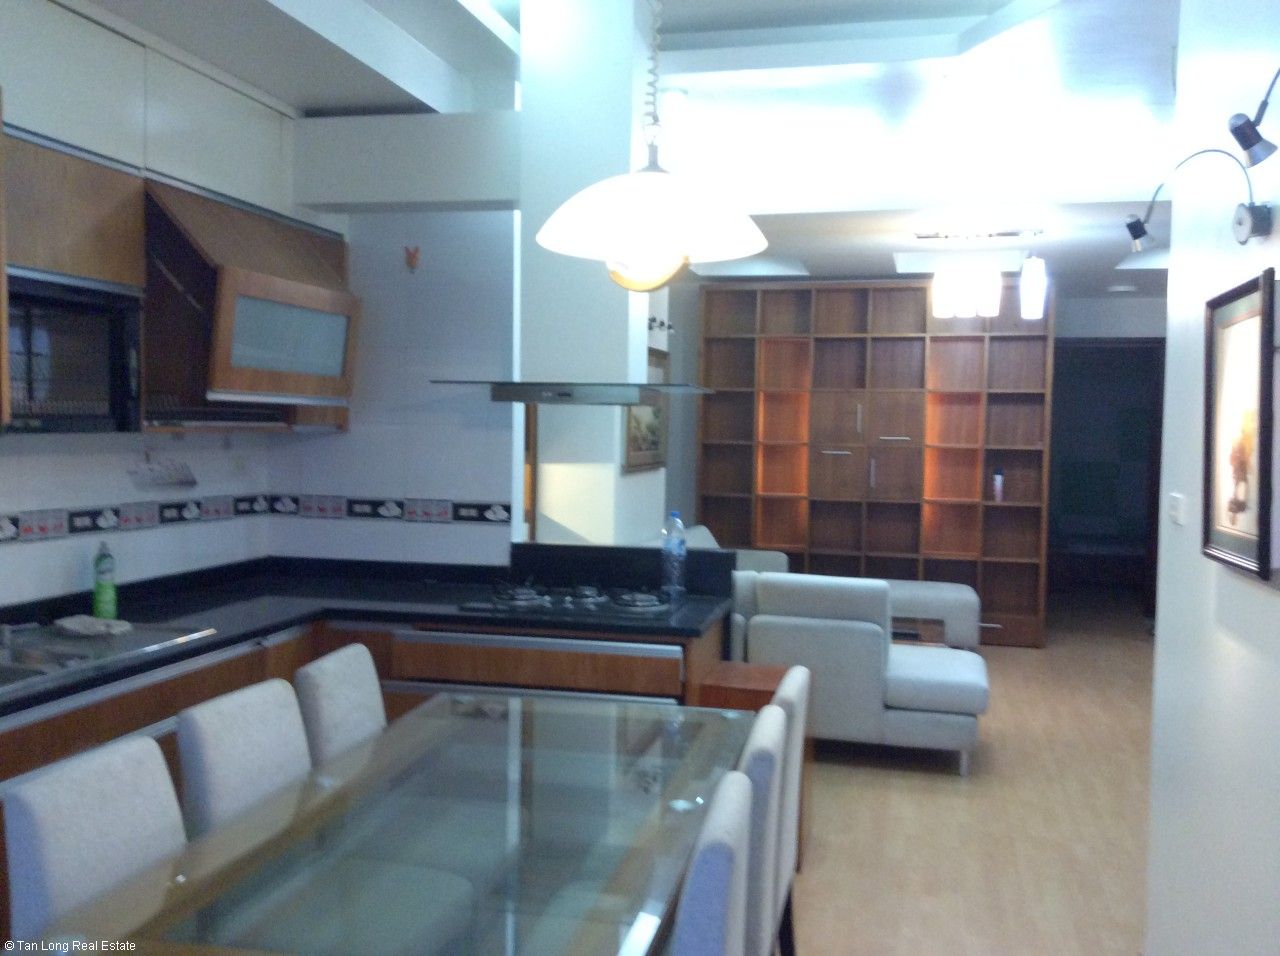 Fully equipped 3 bedroom apartment for rent in Kinh Do Building, Hai Ba Trung dist, Hanoi 4